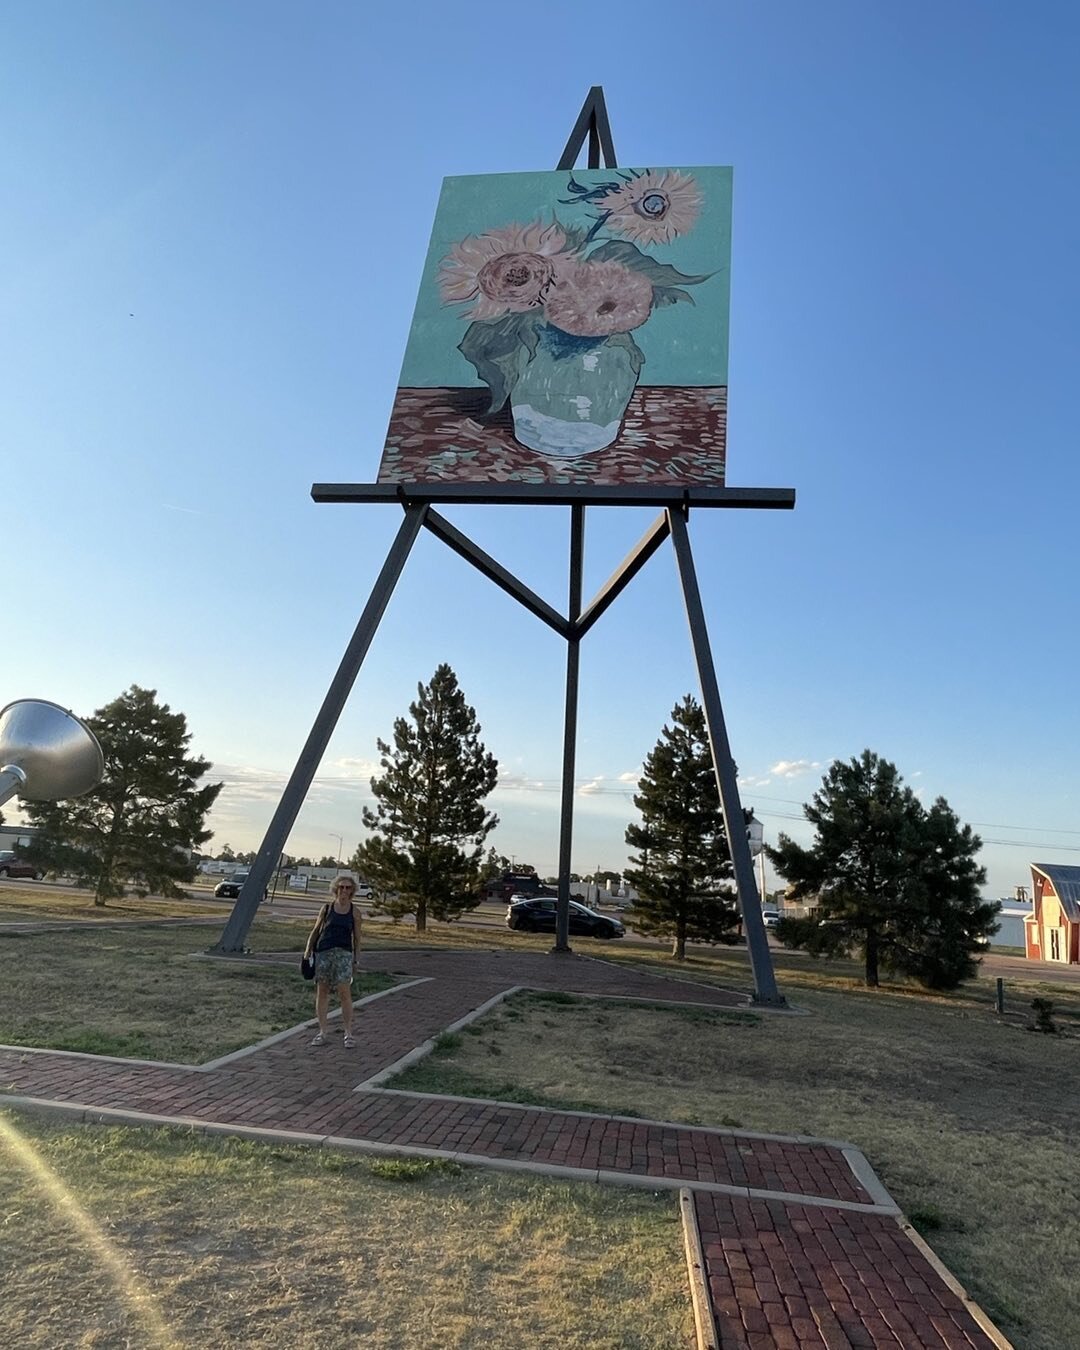 The world&rsquo;s largest easel and world&rsquo;s largest repro of Van Gogh&rsquo;s Sunflowers here in Kansas!